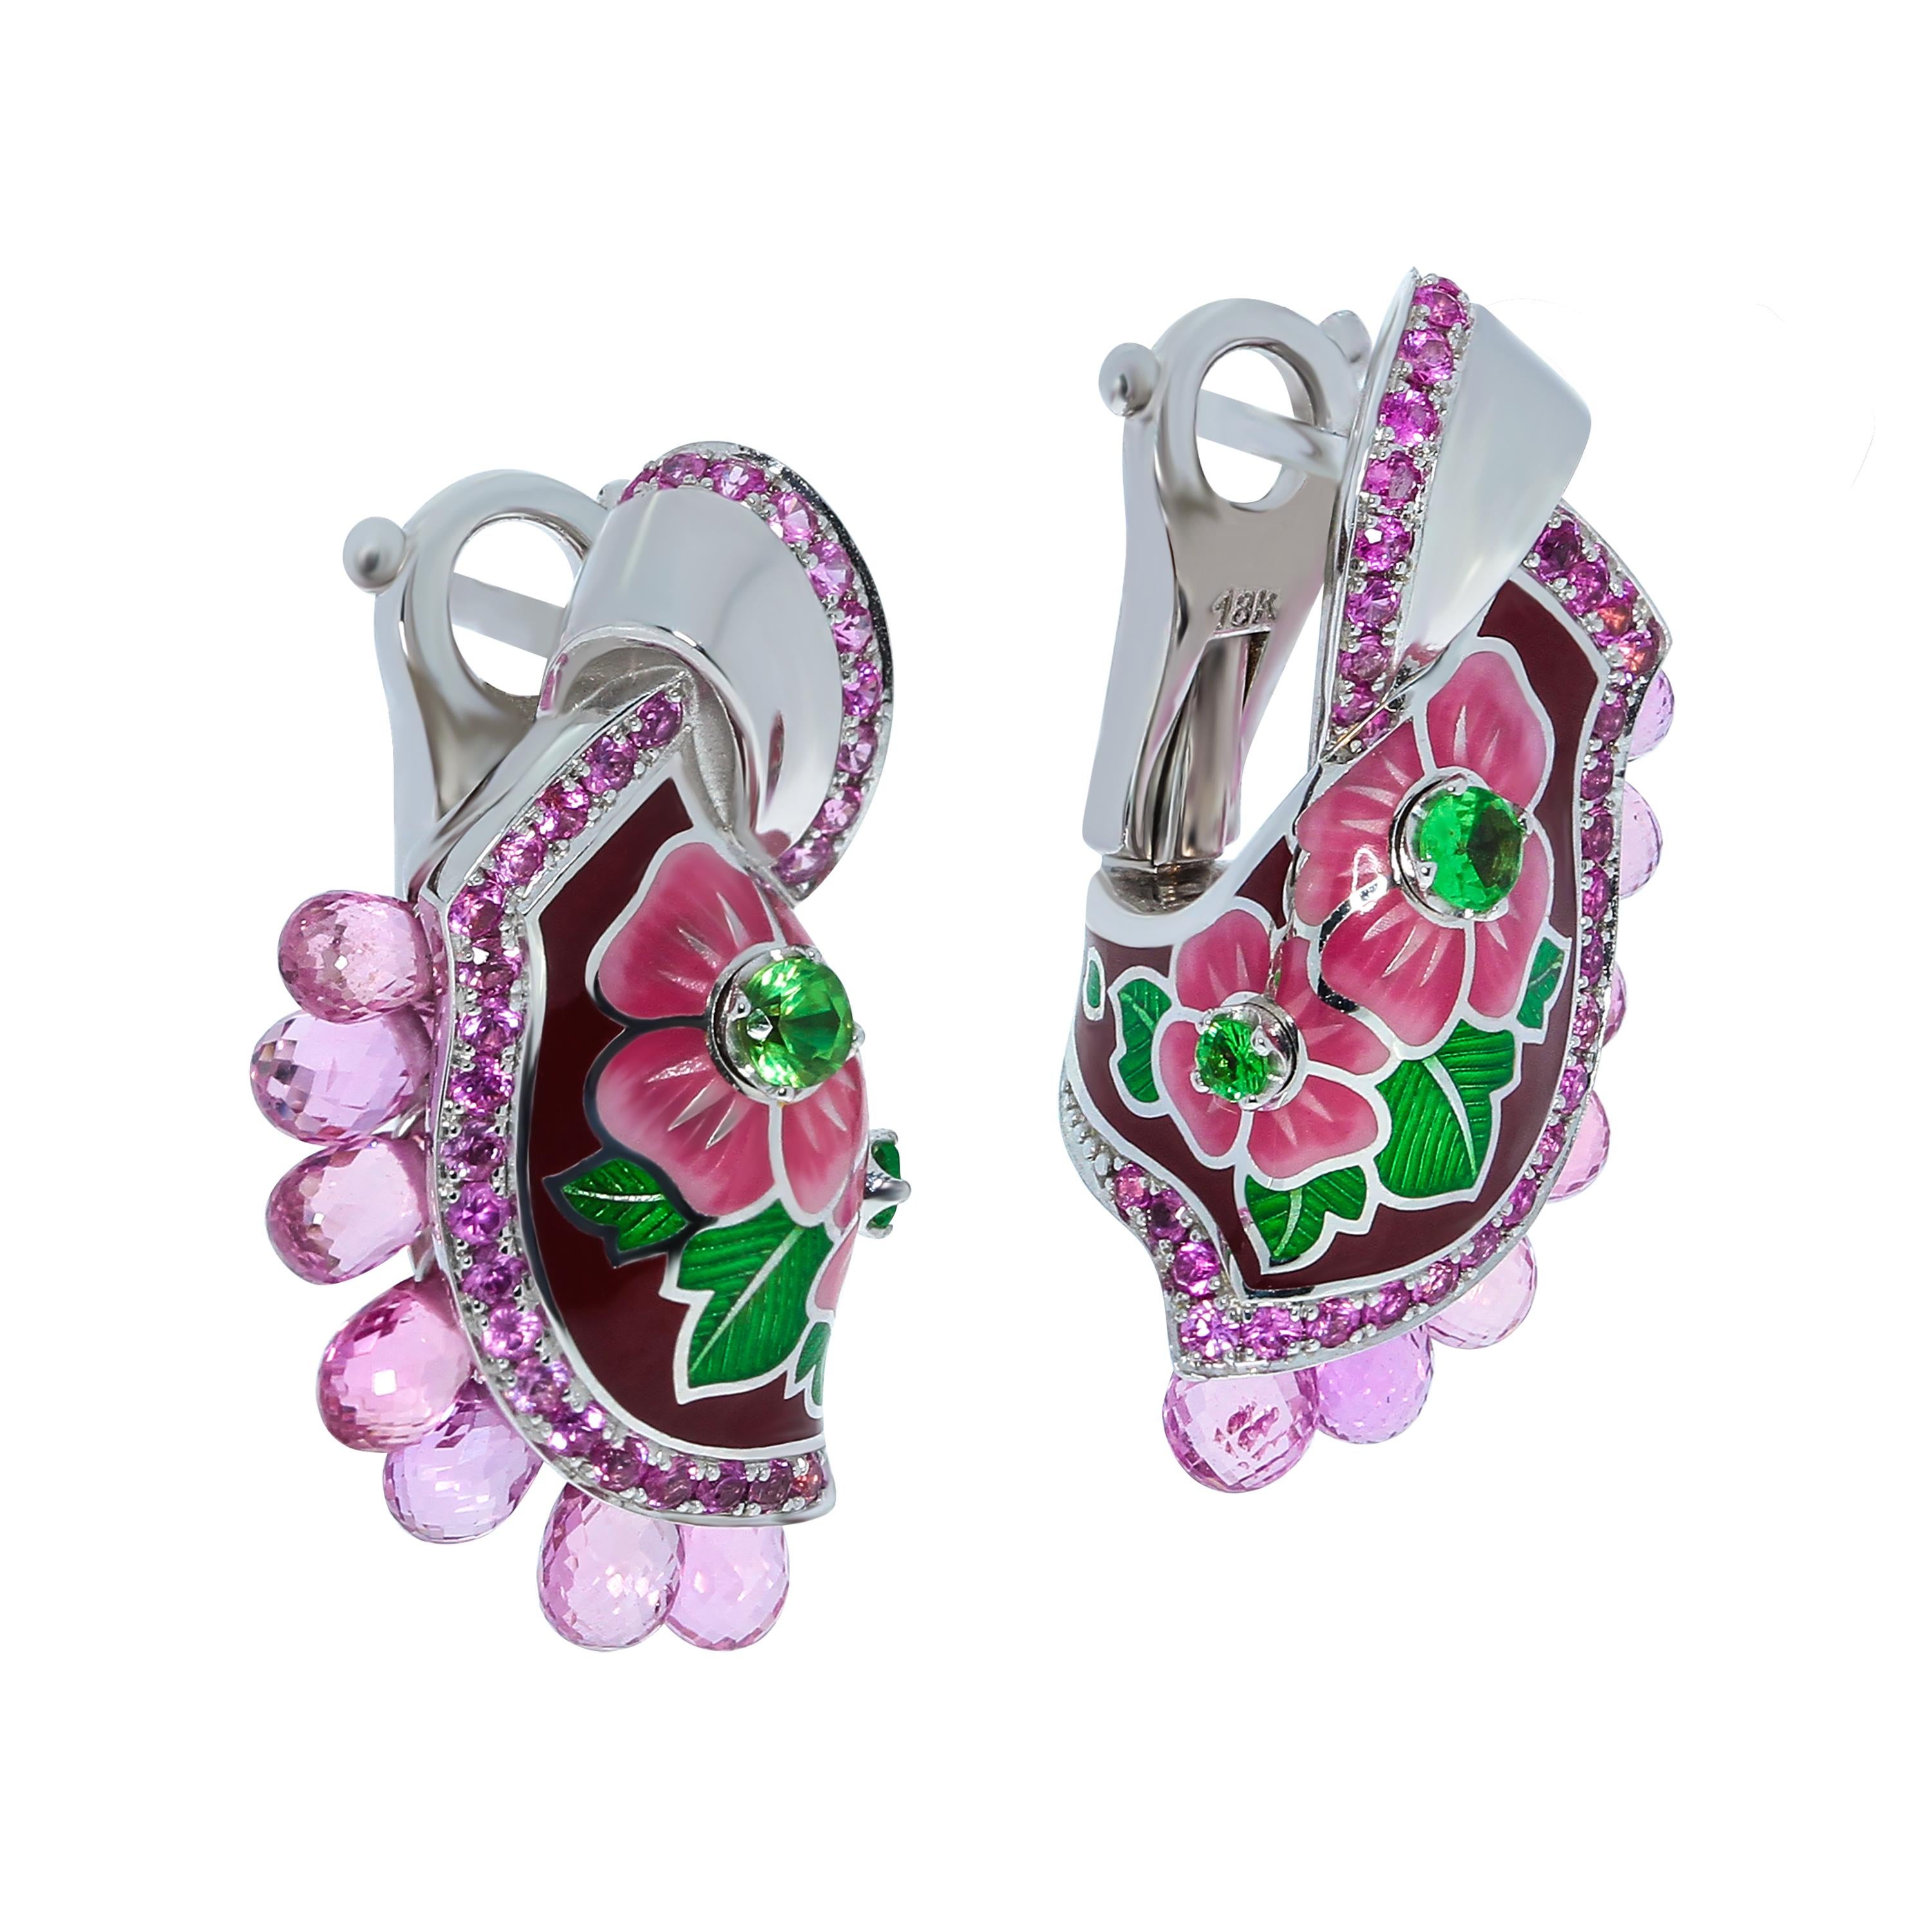 Sapphires Briolettes Tsavorites Enamel 18 Karat White Gold A'la Russe Earrings
What do you know about Pavlovo Posad shawls? This is a large part of Russian culture, which originated in the 17th century. They are large patterned scarves, which are